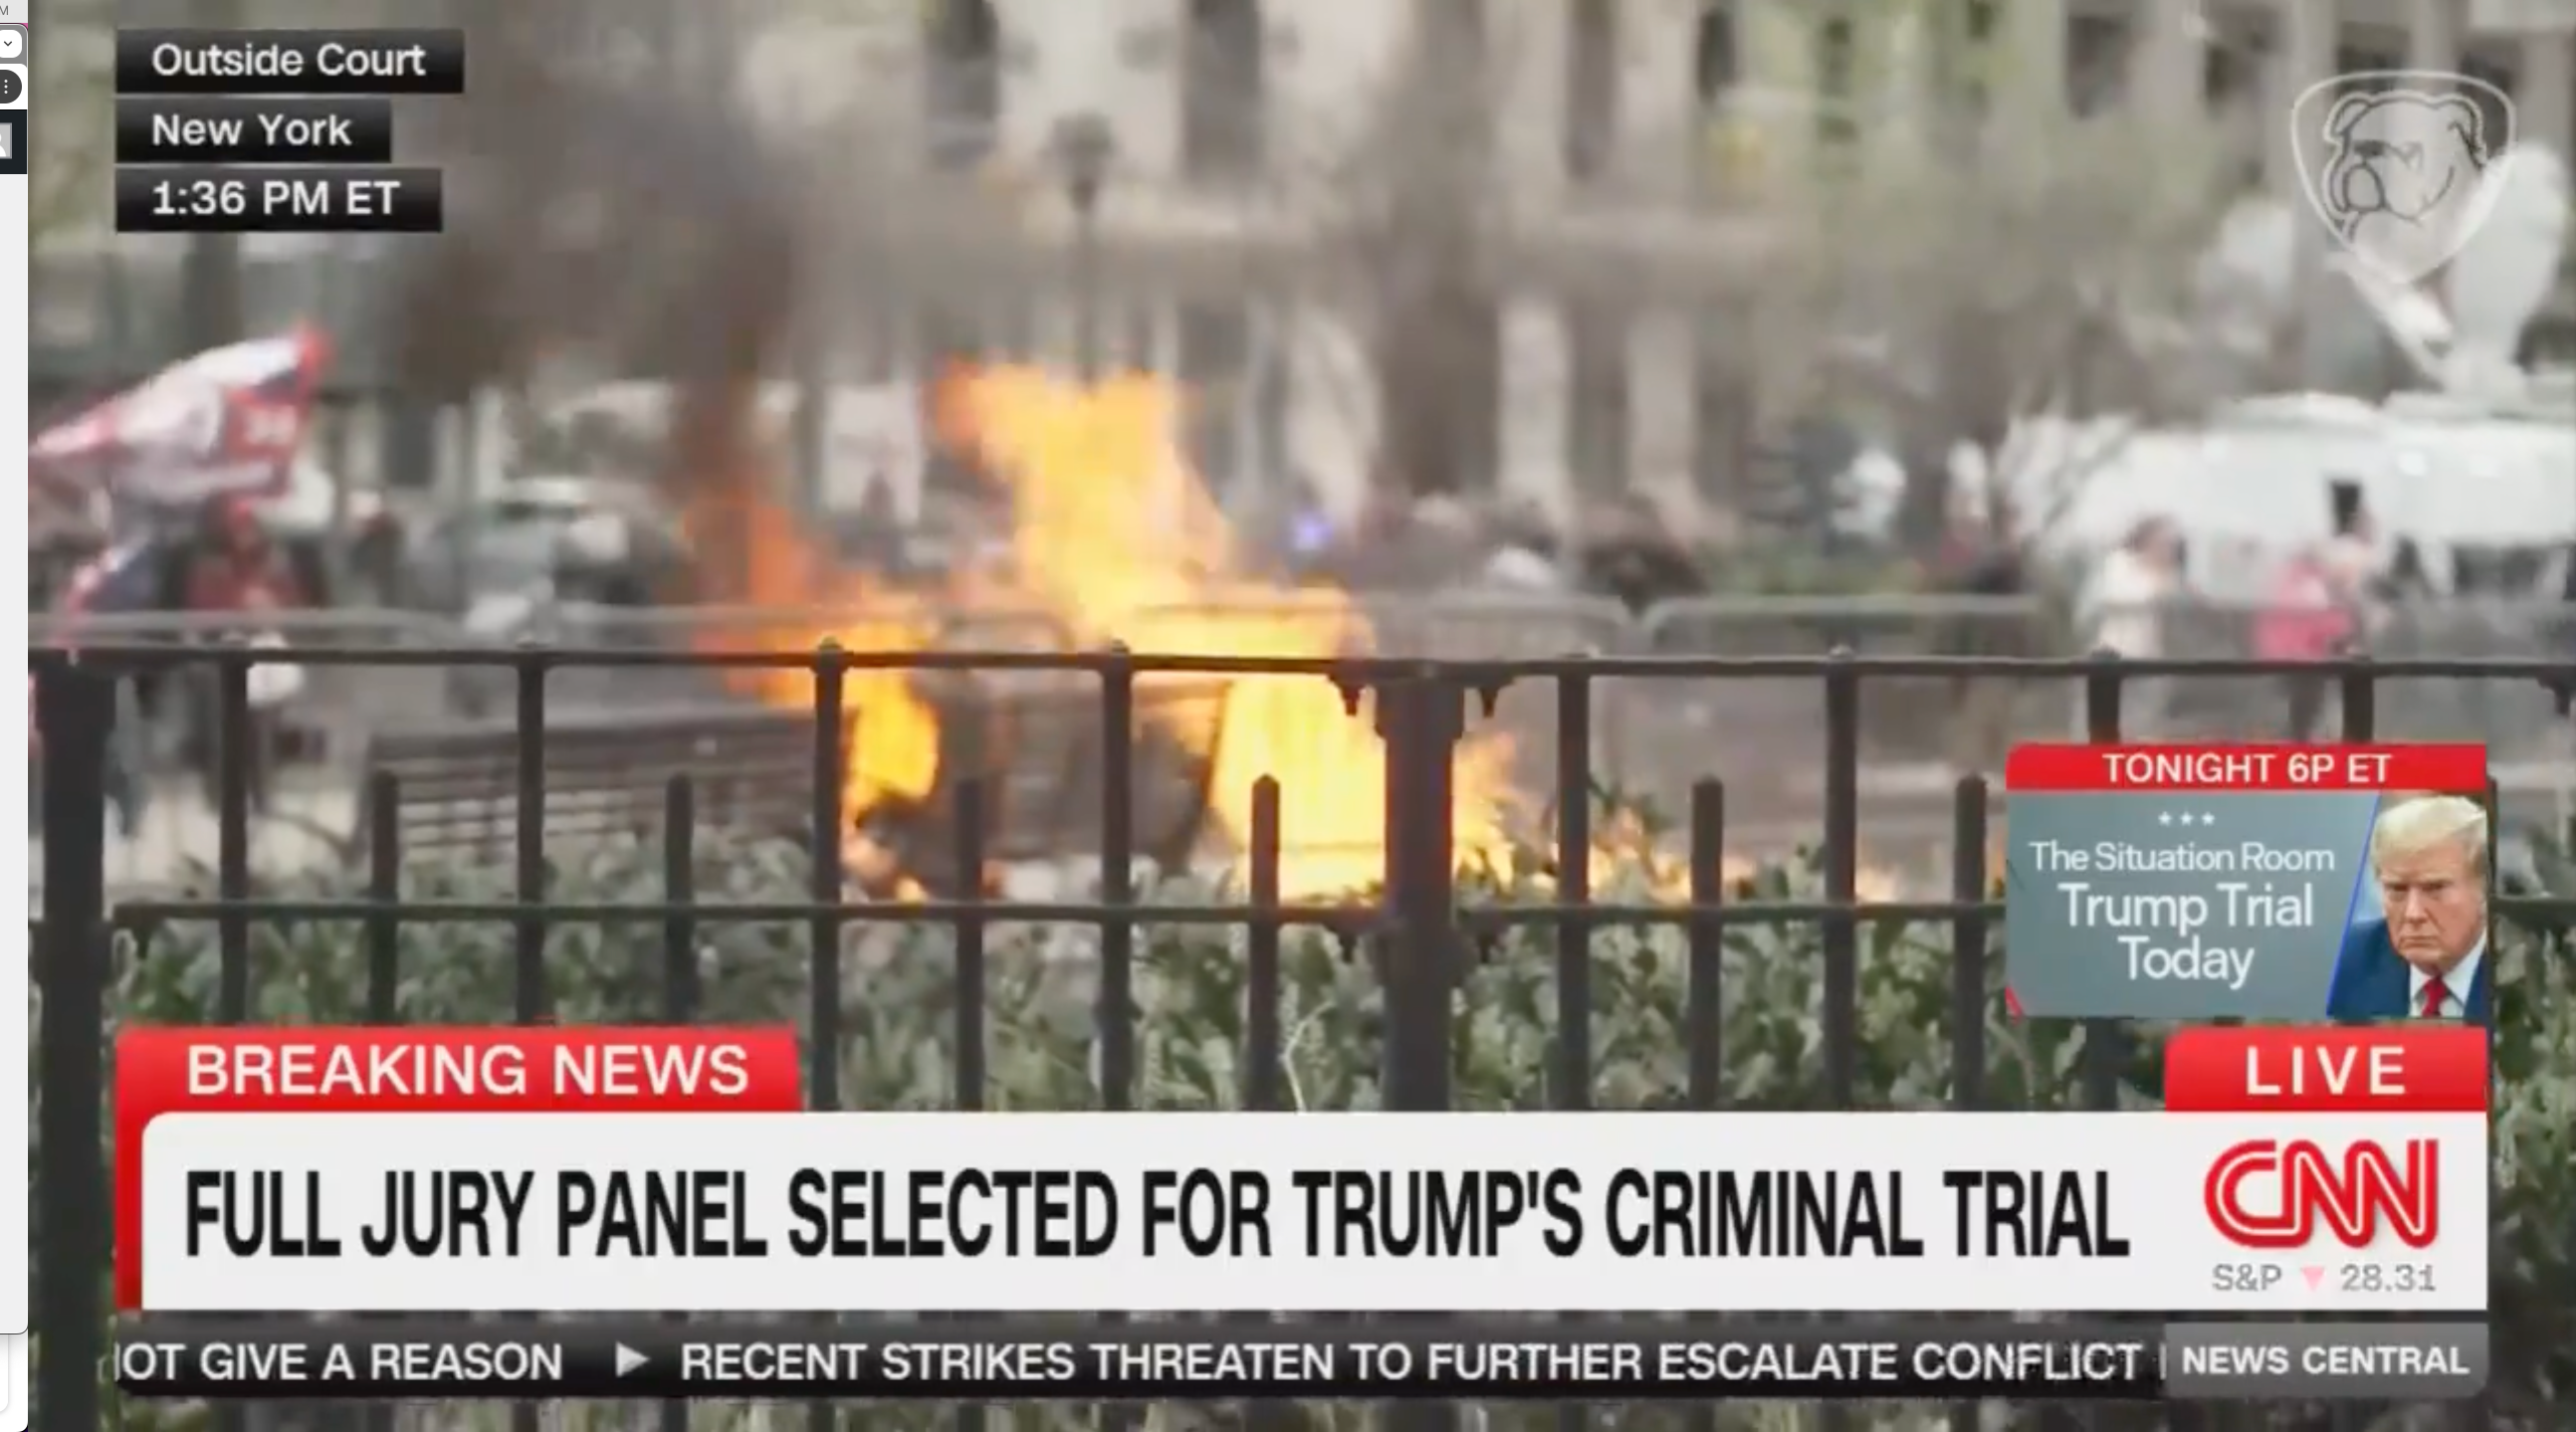 Individual self-immolates outside courthouse during Trump trial